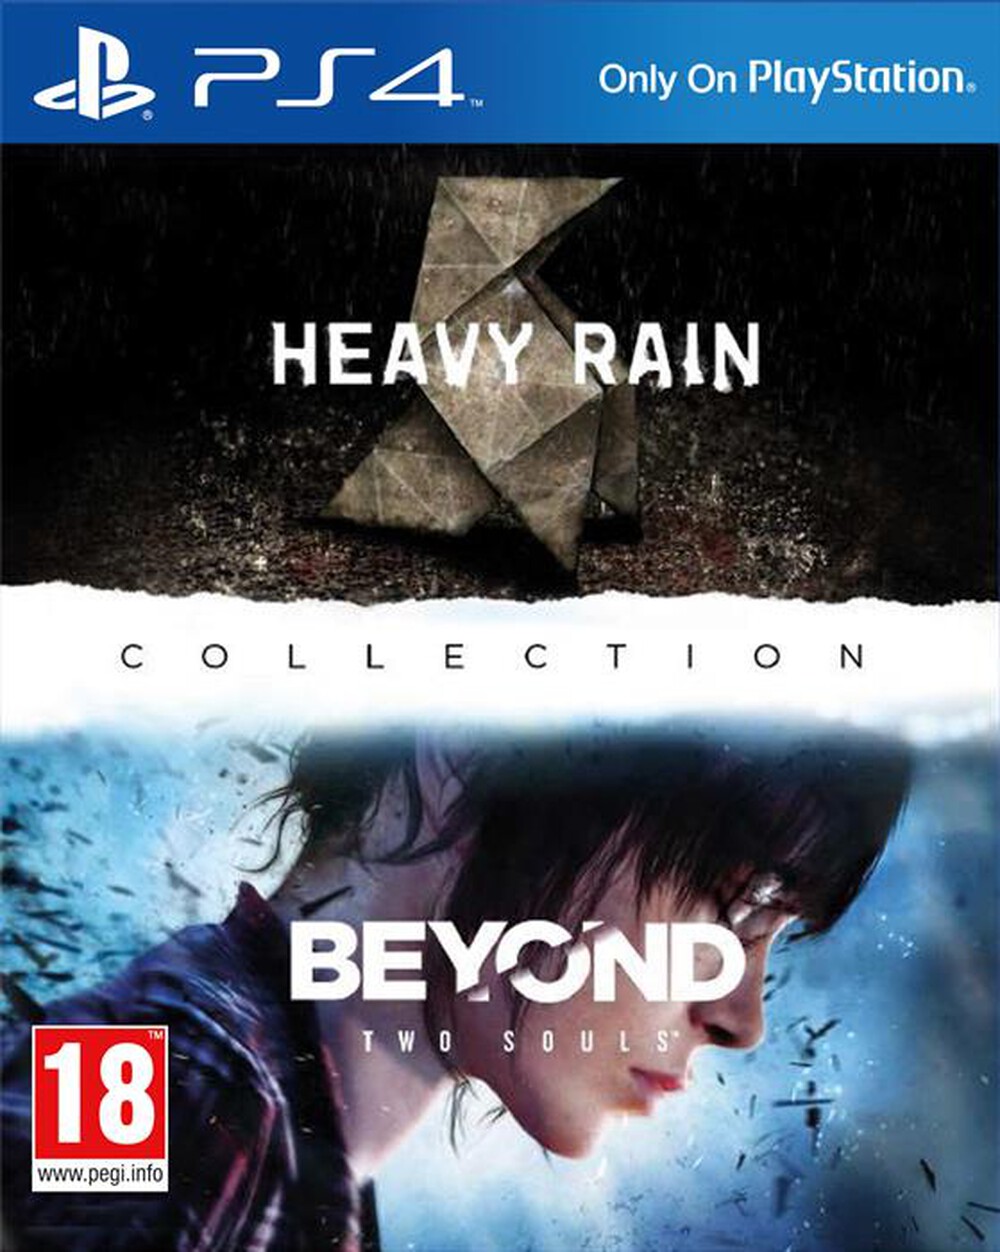 "SONY COMPUTER - HEAVY RAIN - BEYOND 2 Anime Collection PS4"